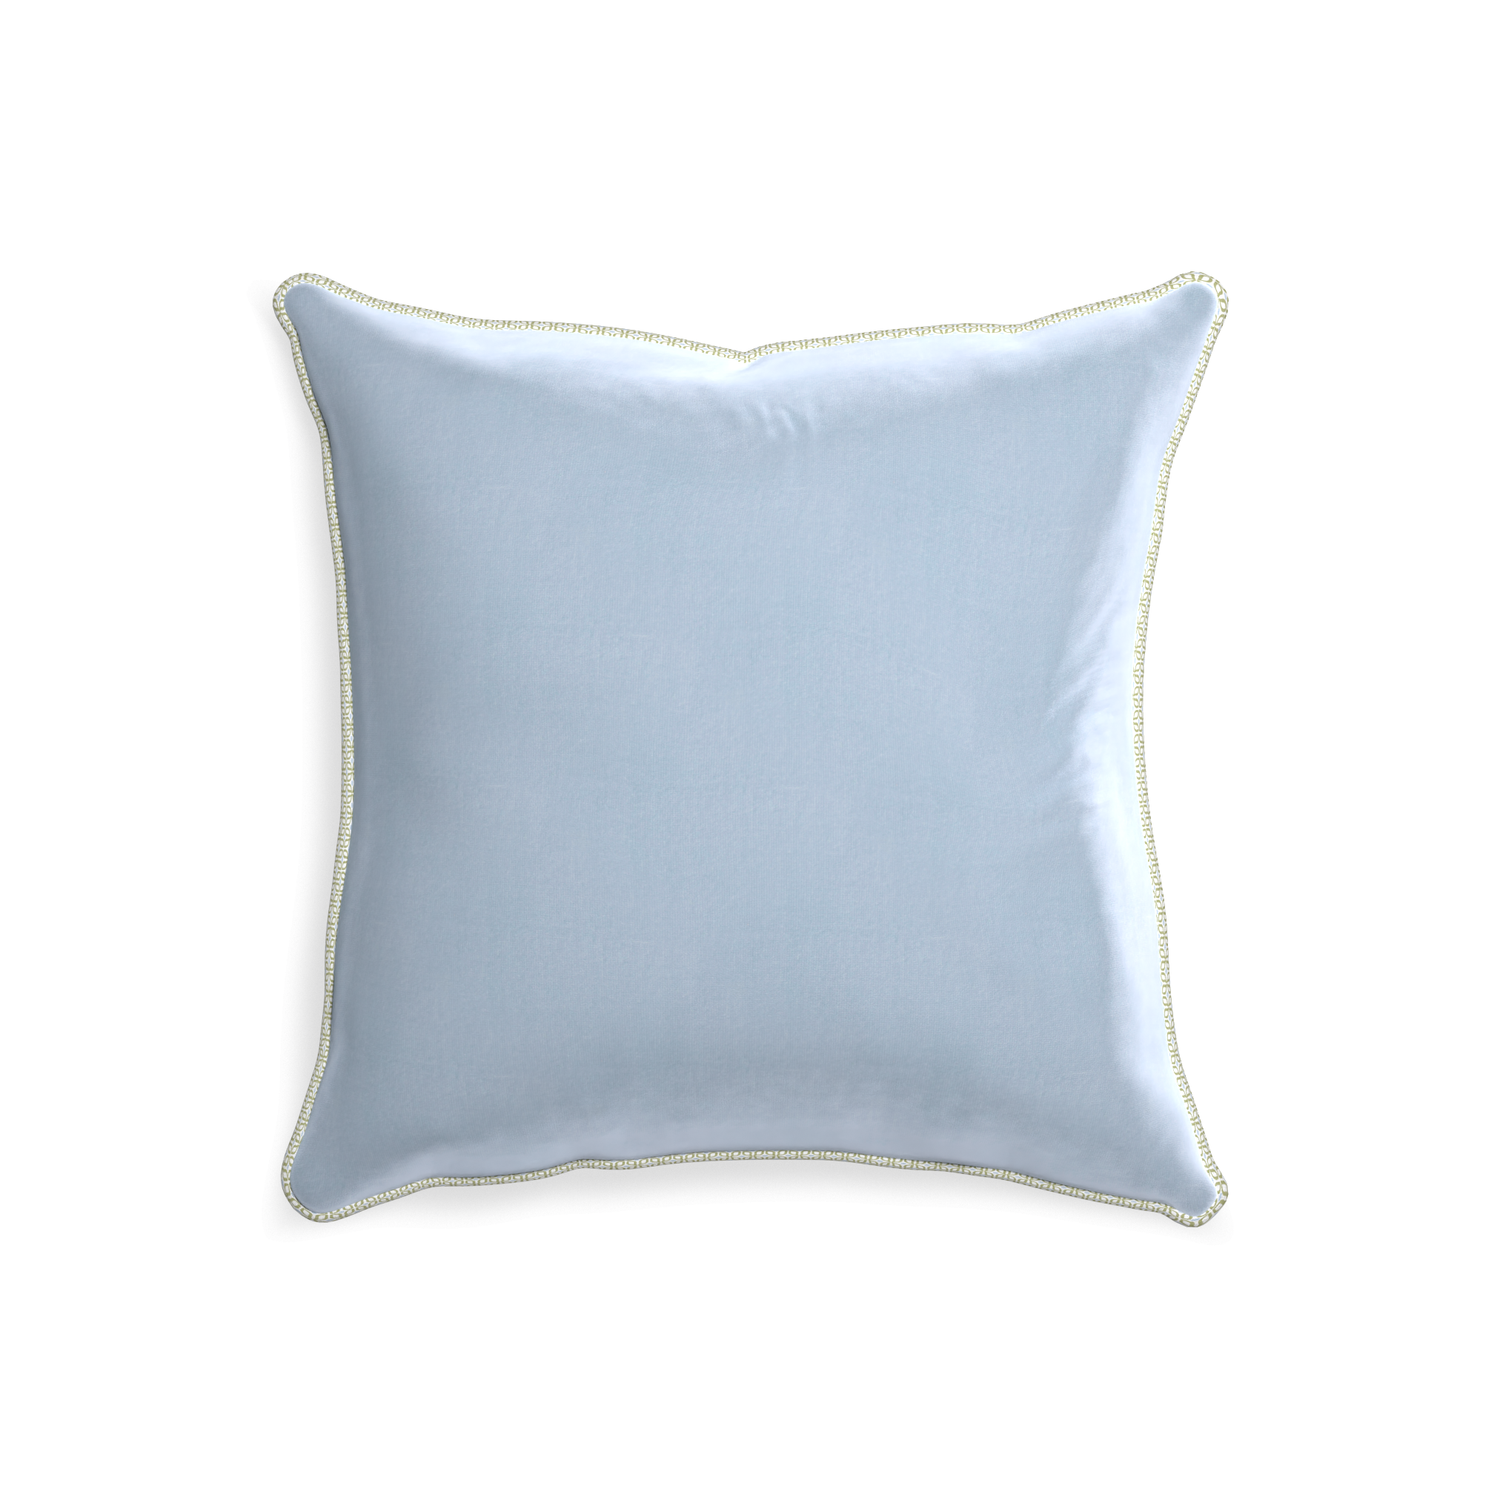 square light blue velvet pillow with moss green geometric piping